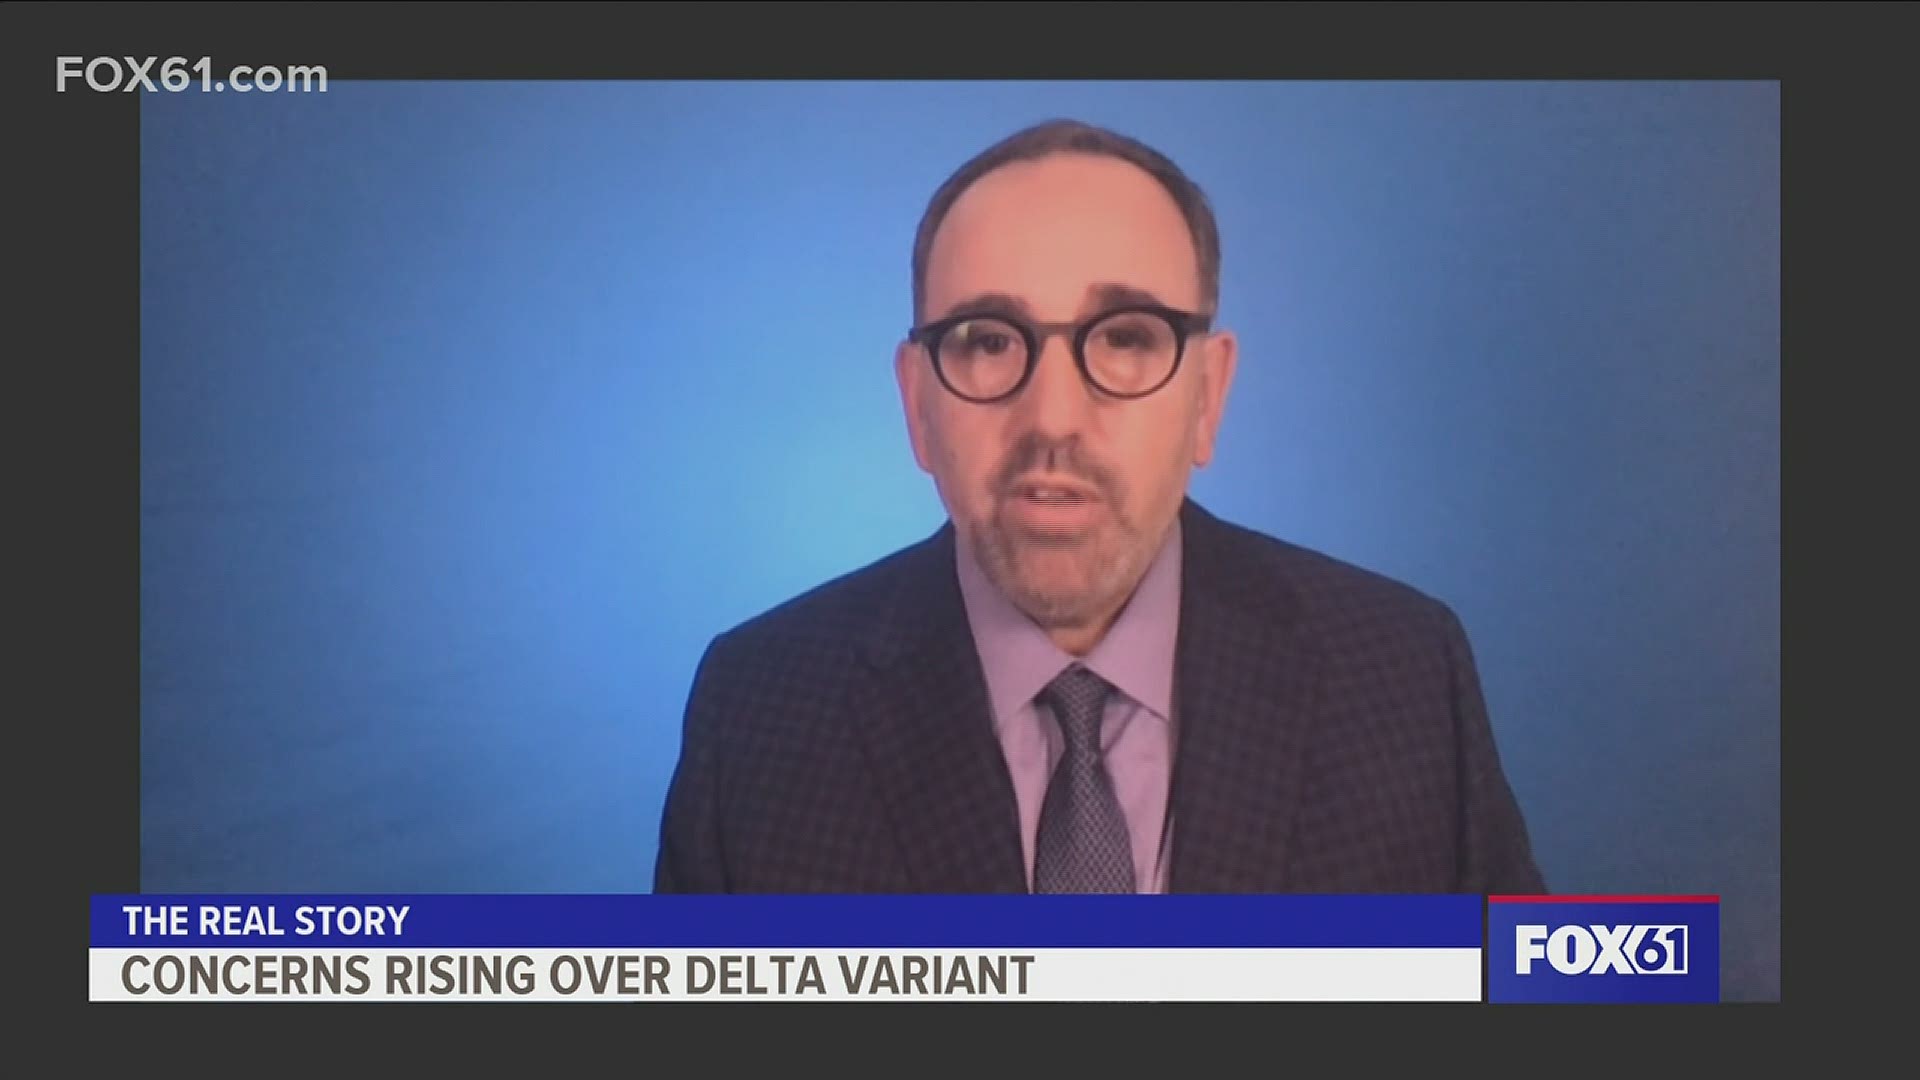 Concerns over the Delta Variant are on the rise in Connecticut.